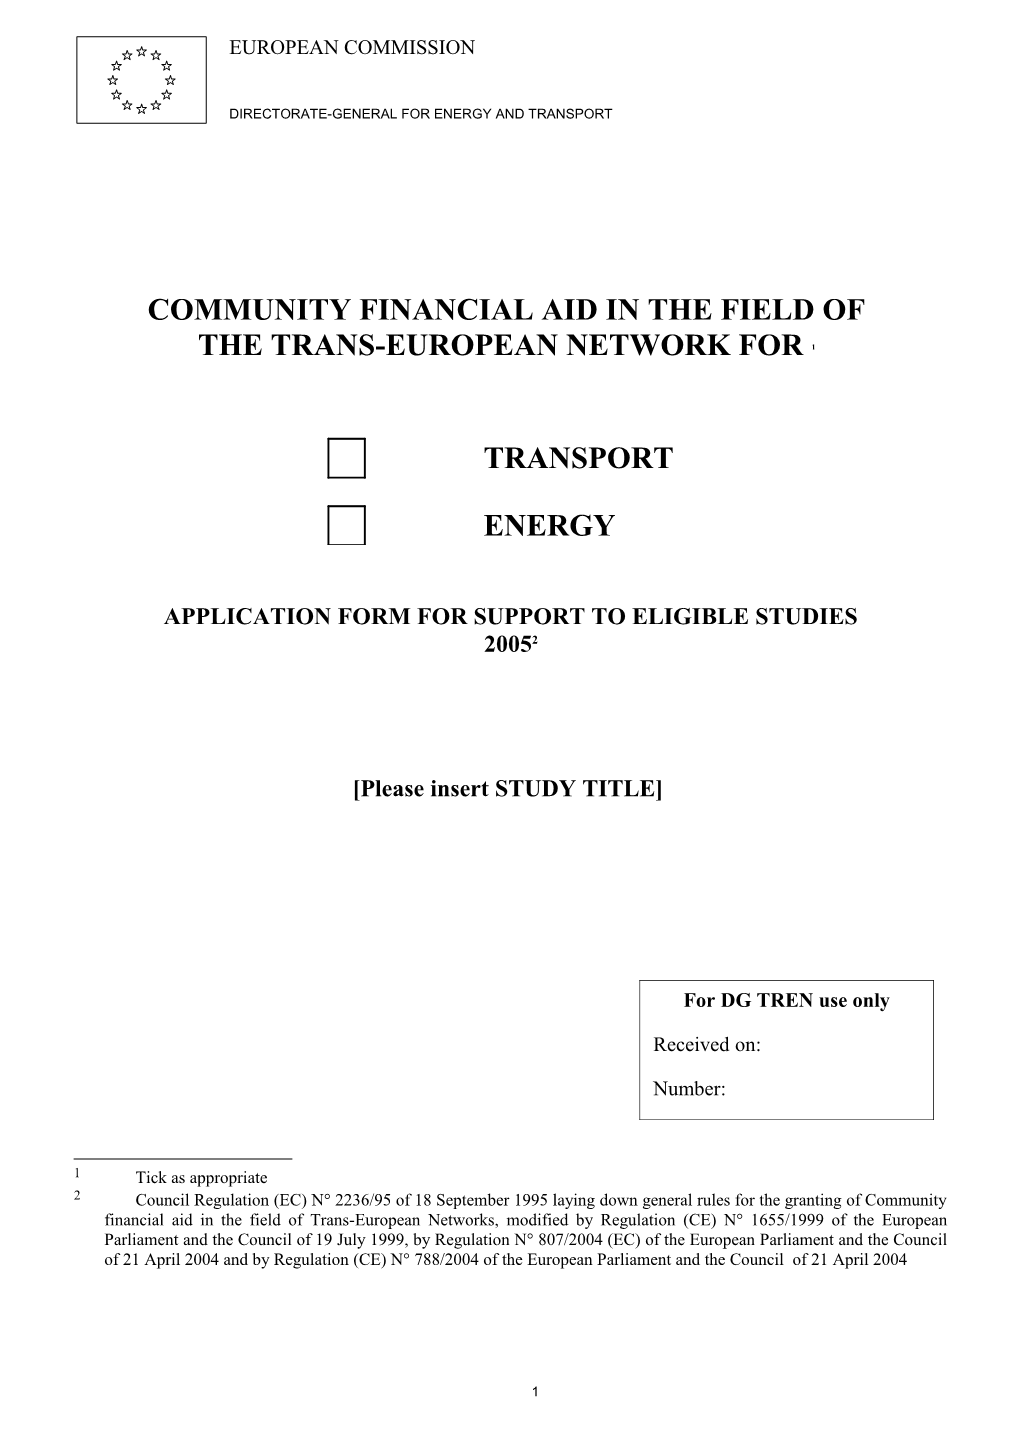 Community Financial Aid in the Field of the Trans-European Network for 1